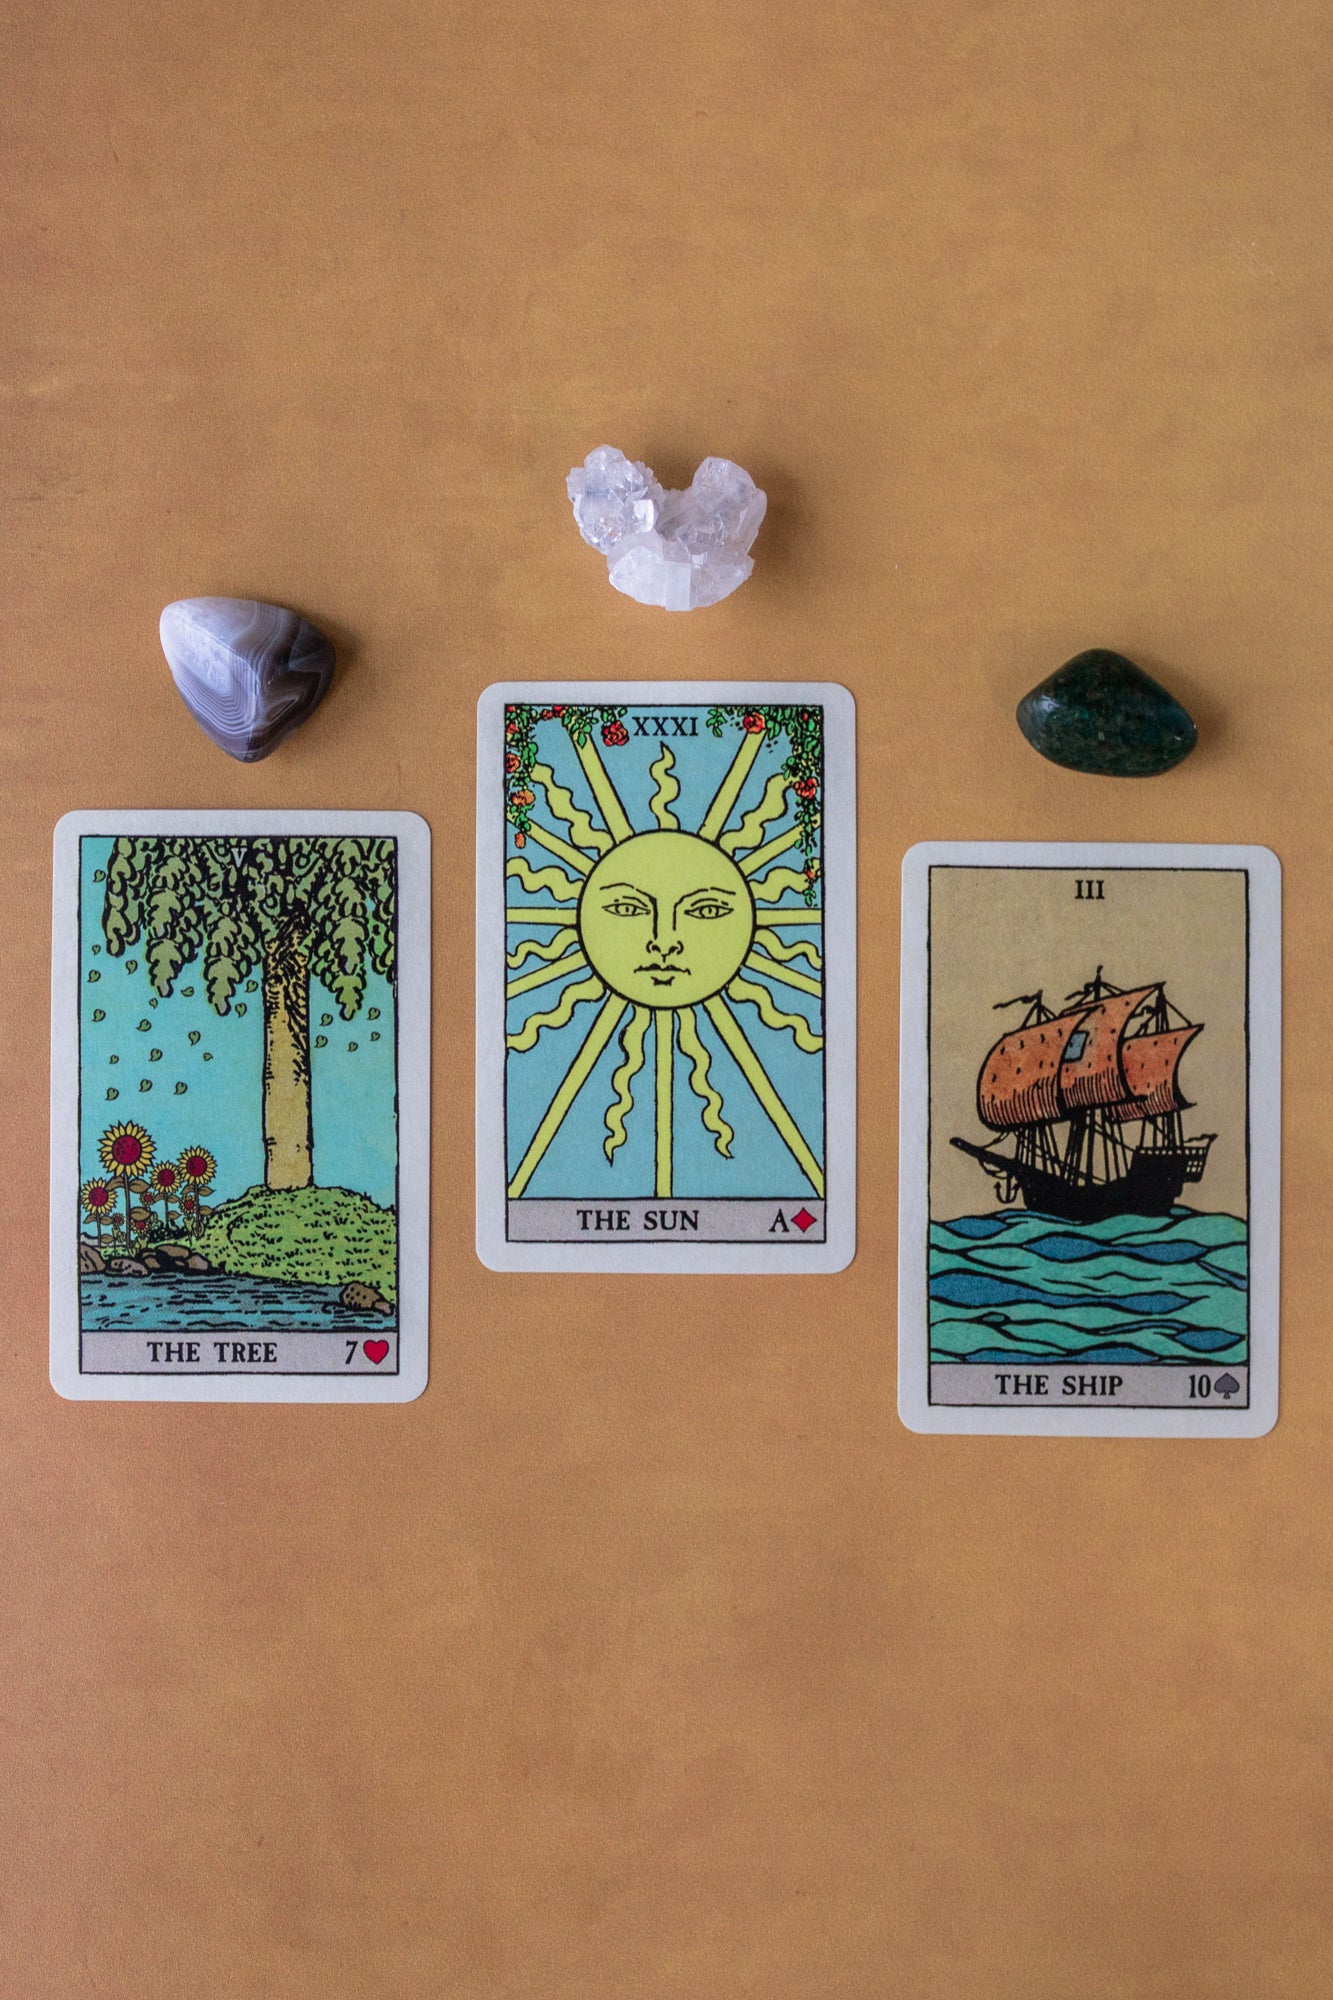 Three cards from Pixie's Astounding Lenormand deck are spread out: The Tree, The Sun, and The Ship. Three crystals lay above them.